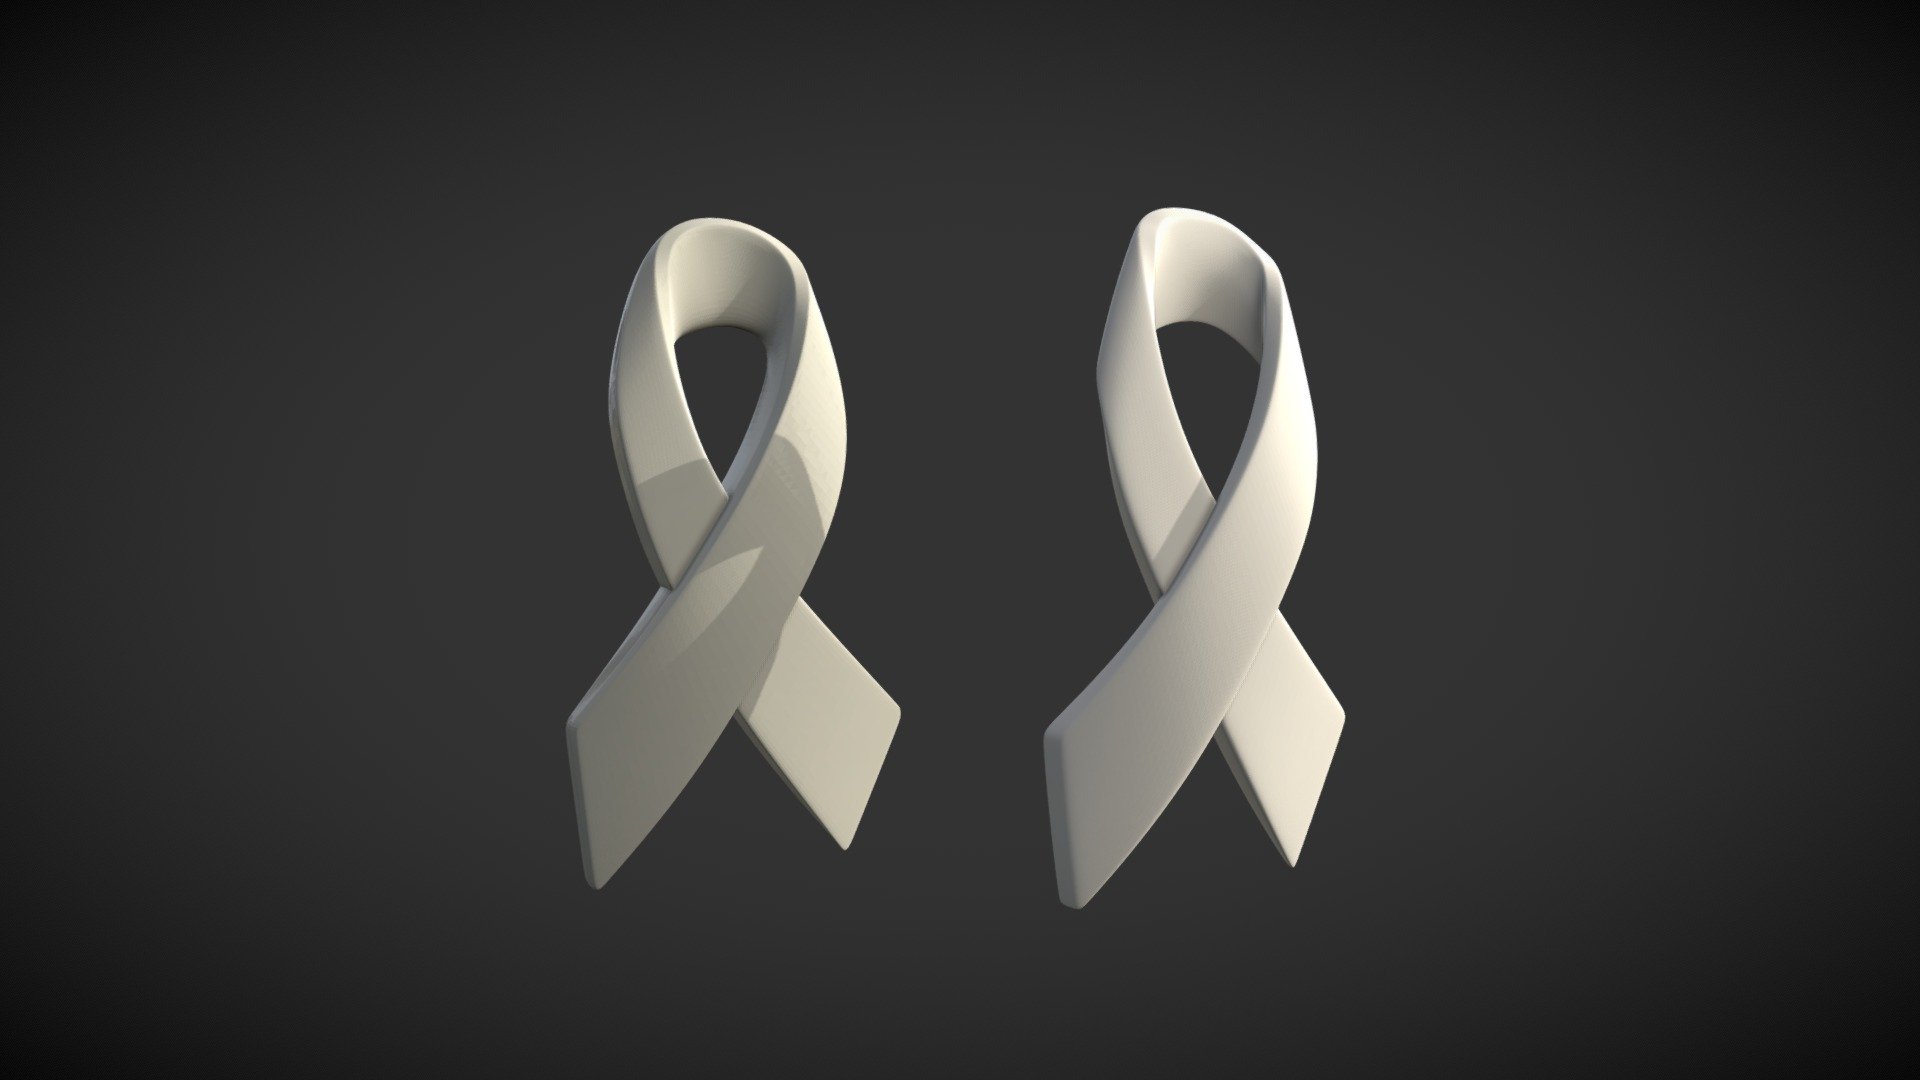 Print ready Cancer Ribbon, can be used for CNC carving either.

Measure units are millimeters, it is about 6.4 cm in height.

Mesh is manifold, no holes, no bad contiguous edges.

Two version of the ribbon are available:

1) Cancer_Ribbon_r (.blend, .stl, .obj, .fbx, .step) The ribbon that is relief like, with flat back. Faces count : 37642

2) Cancer_Ribbon (.blend, .stl, .obj, .fbx, .dae) The ribbon that is more like real one. Faces count : 74840

.step files has lover amount of faces.

There is only one .blend file and its contains both ribbons 3d model